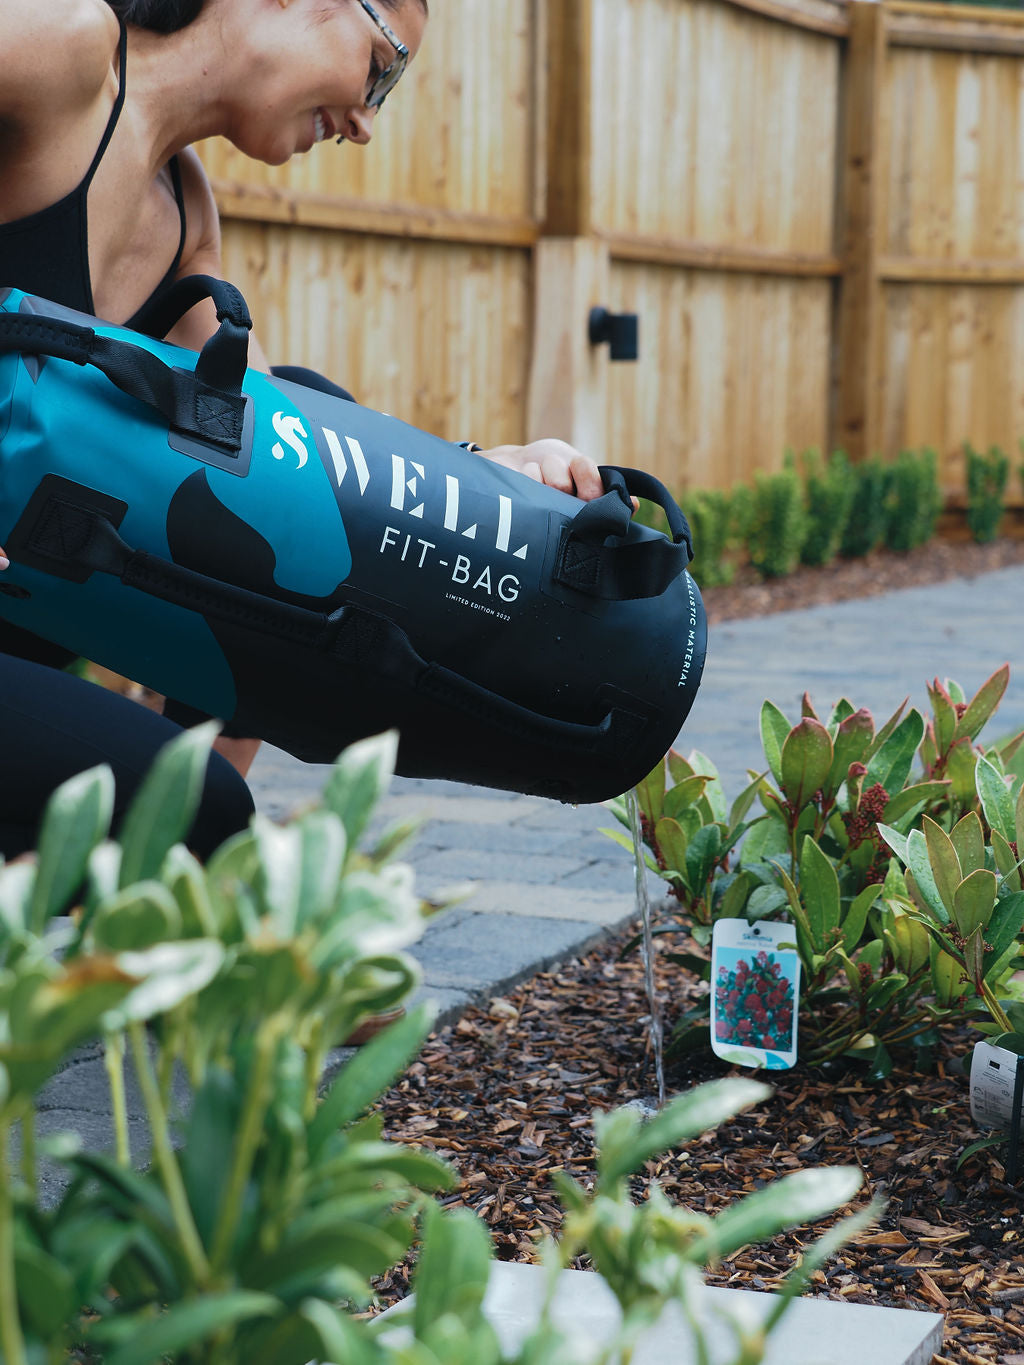 THE SWELL FIT BAG